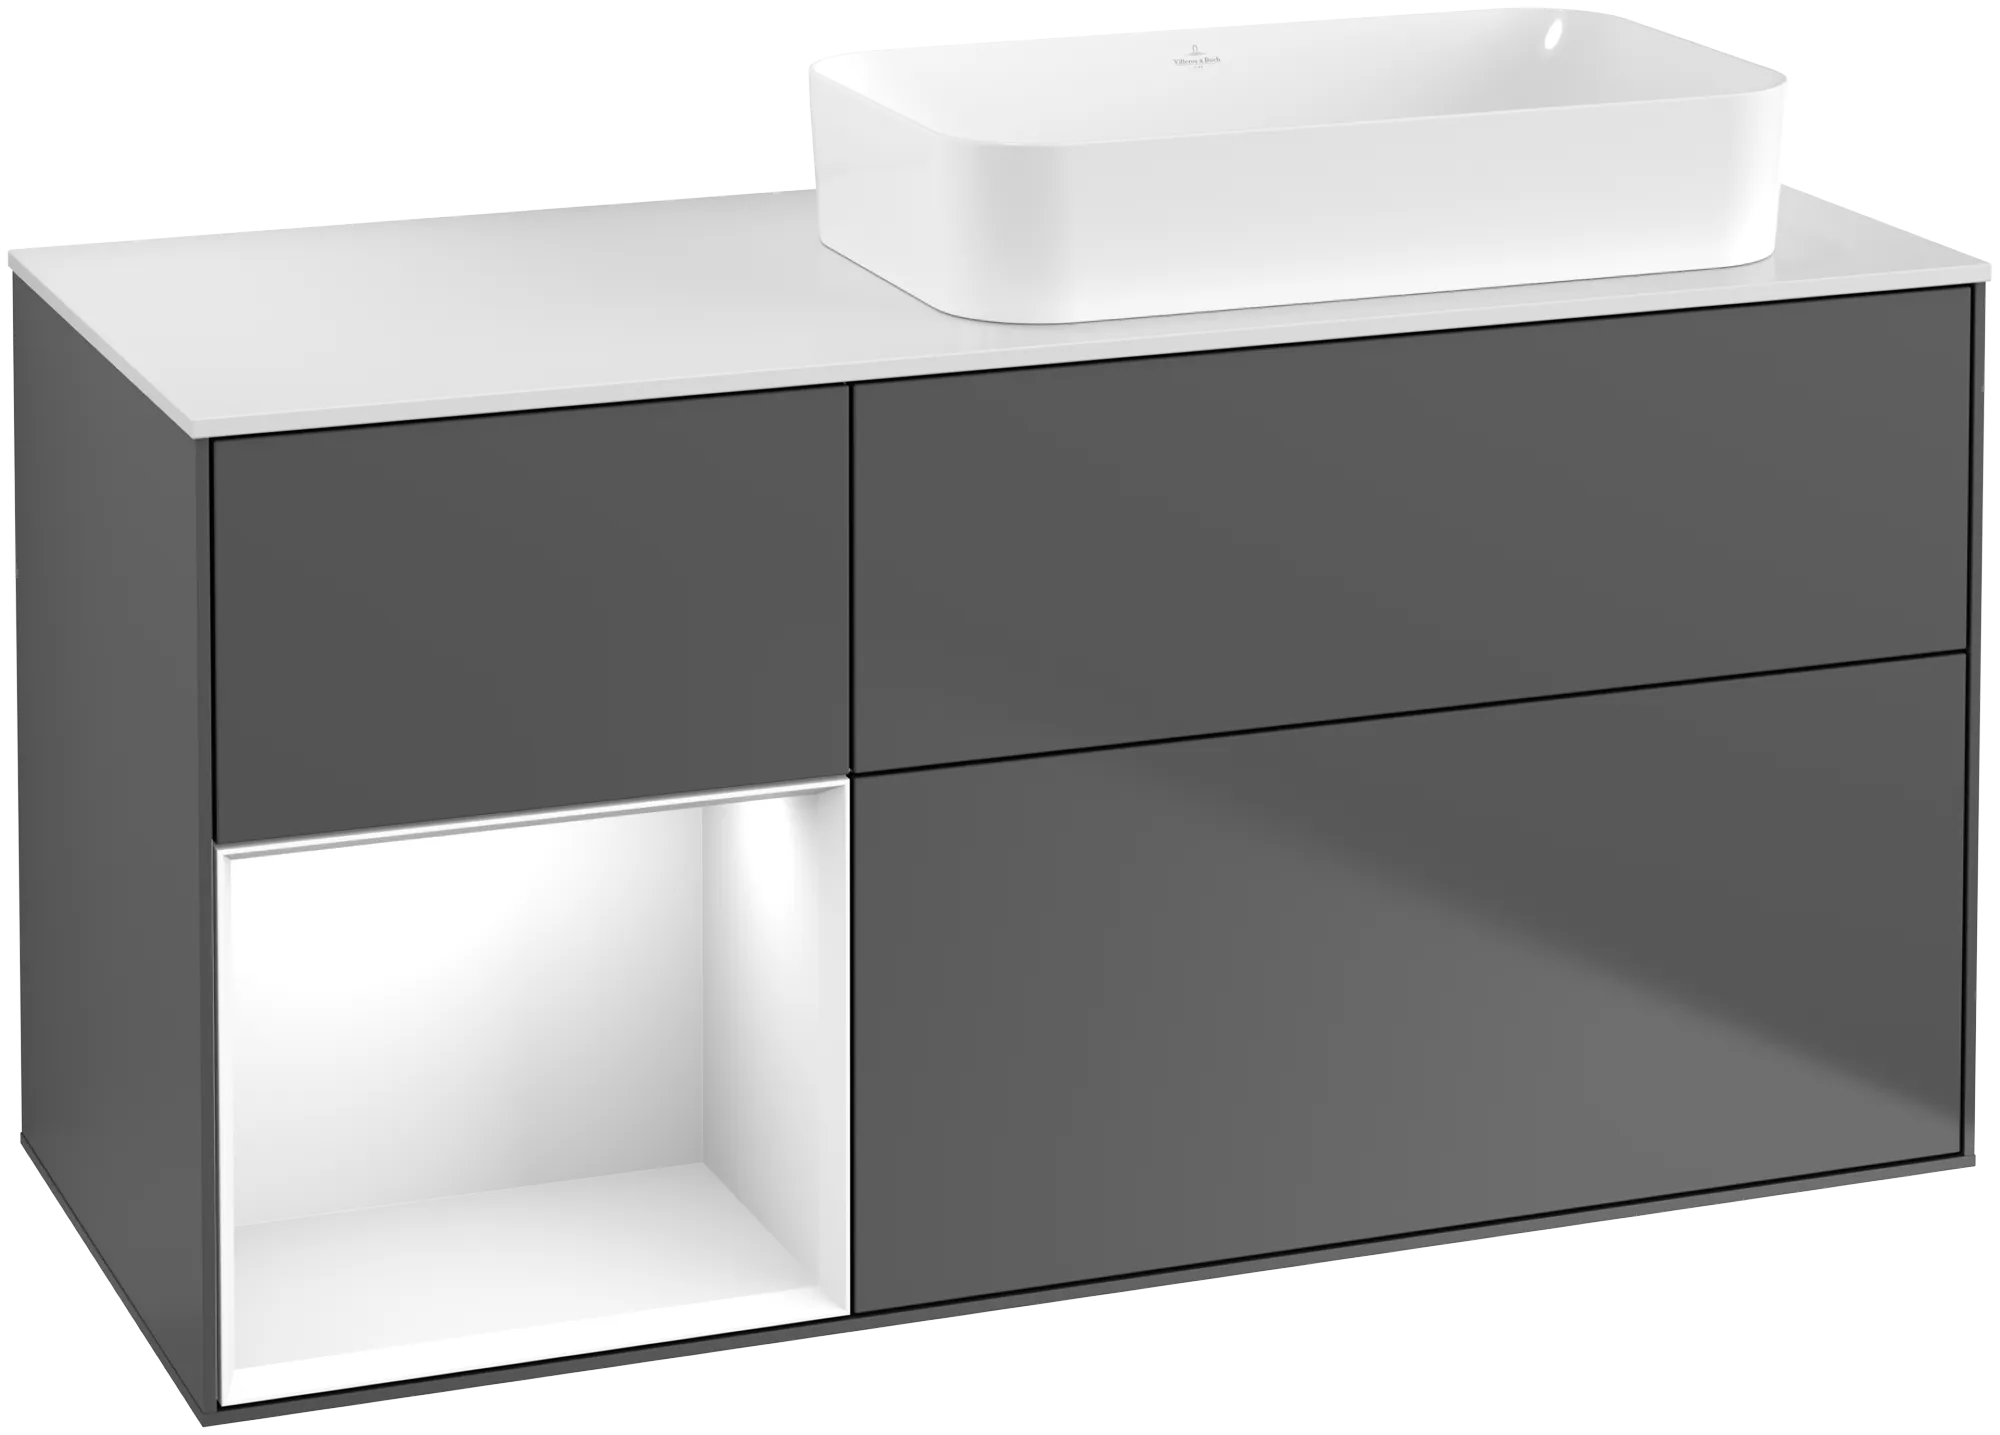 Picture of VILLEROY BOCH Finion Vanity unit, with lighting, 3 pull-out compartments, 1200 x 603 x 501 mm, Anthracite Matt Lacquer / Glossy White Lacquer / Glass White Matt #G681GFGK